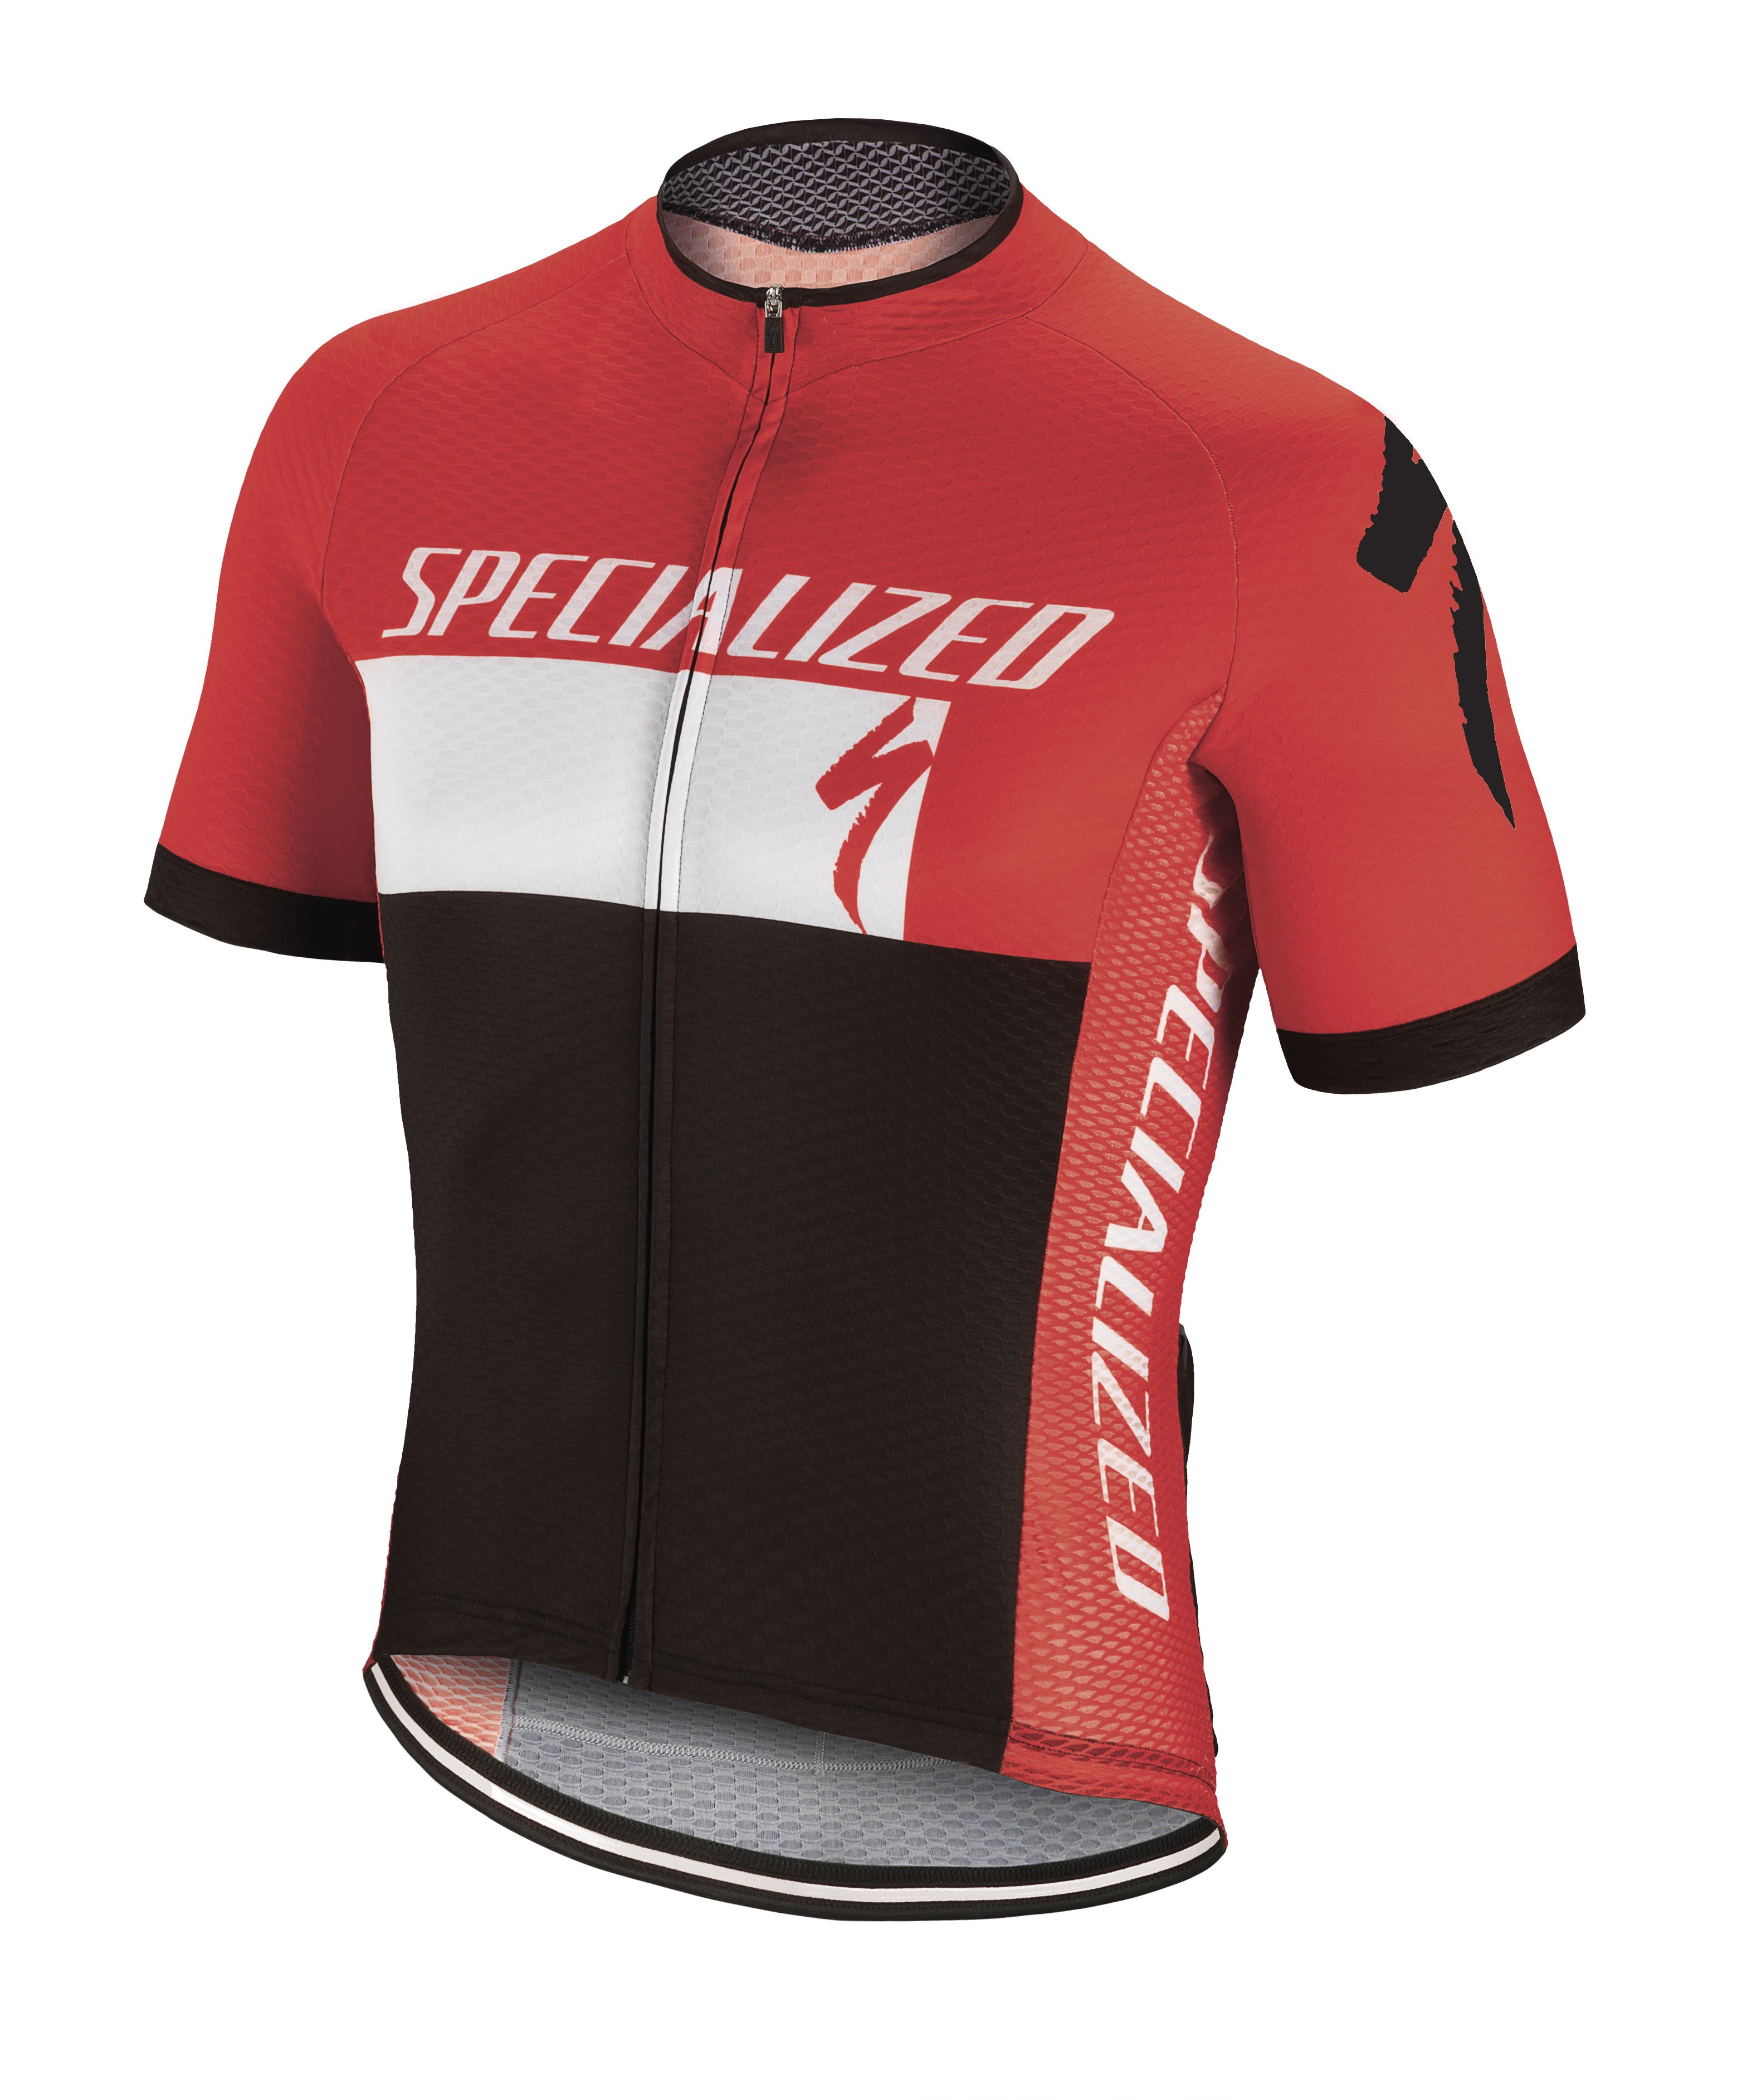 MAILLOT SPECIALIZED M/C RBX LOGO